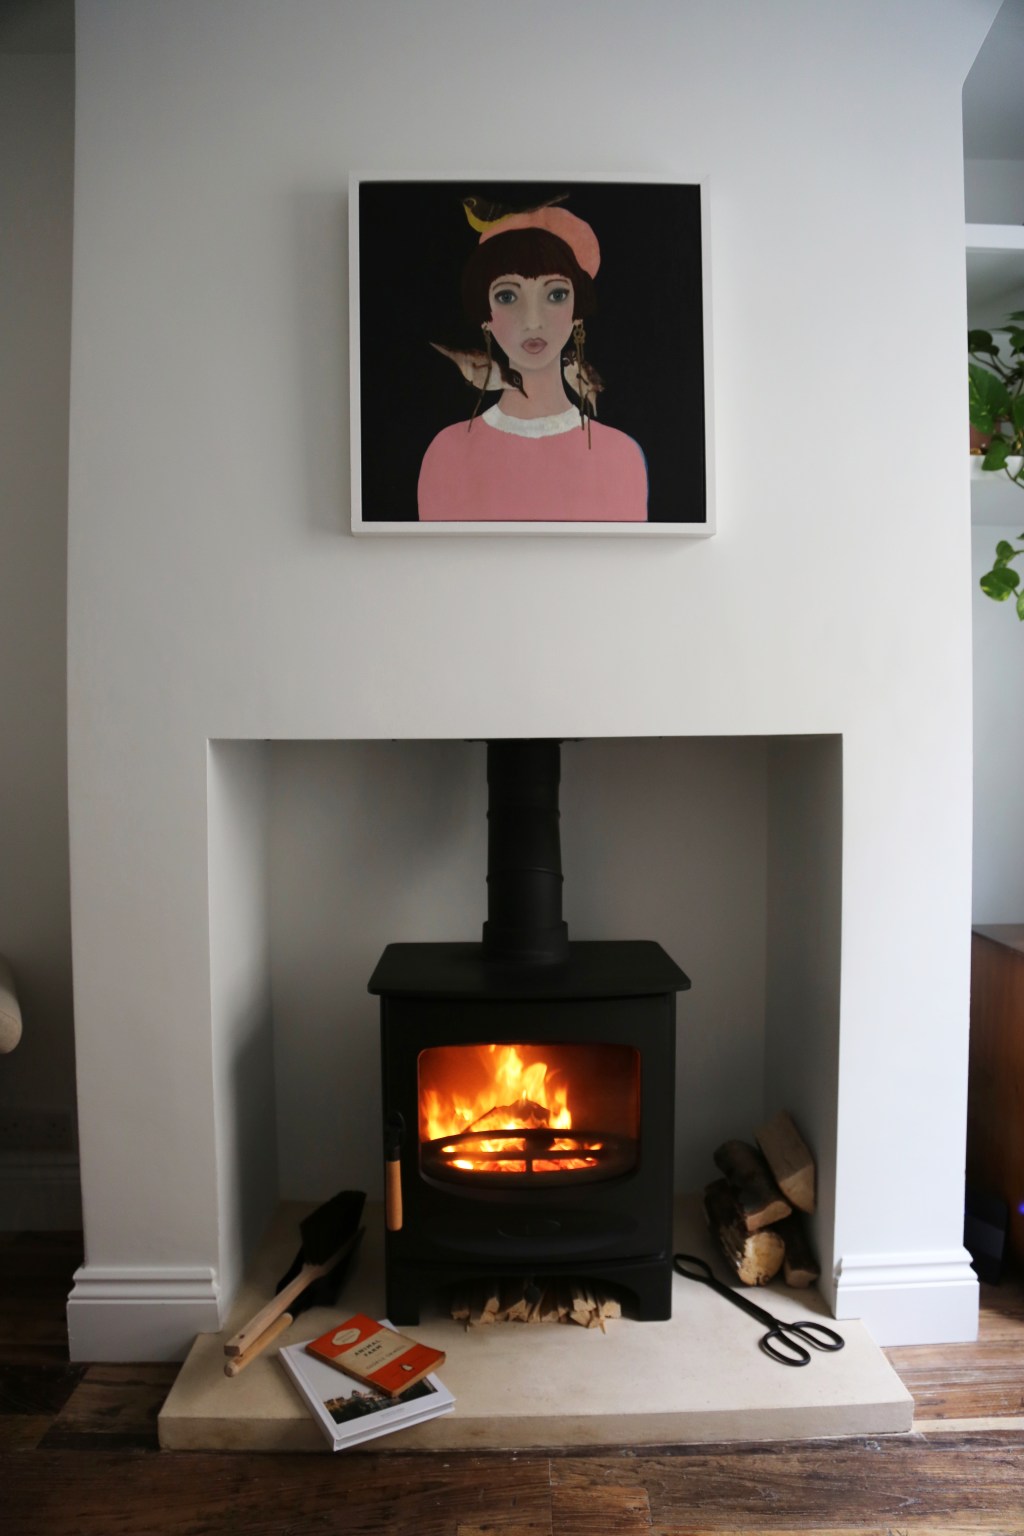 Lit fireplace with a portrait painting of a woman in a pink shirt and hat.